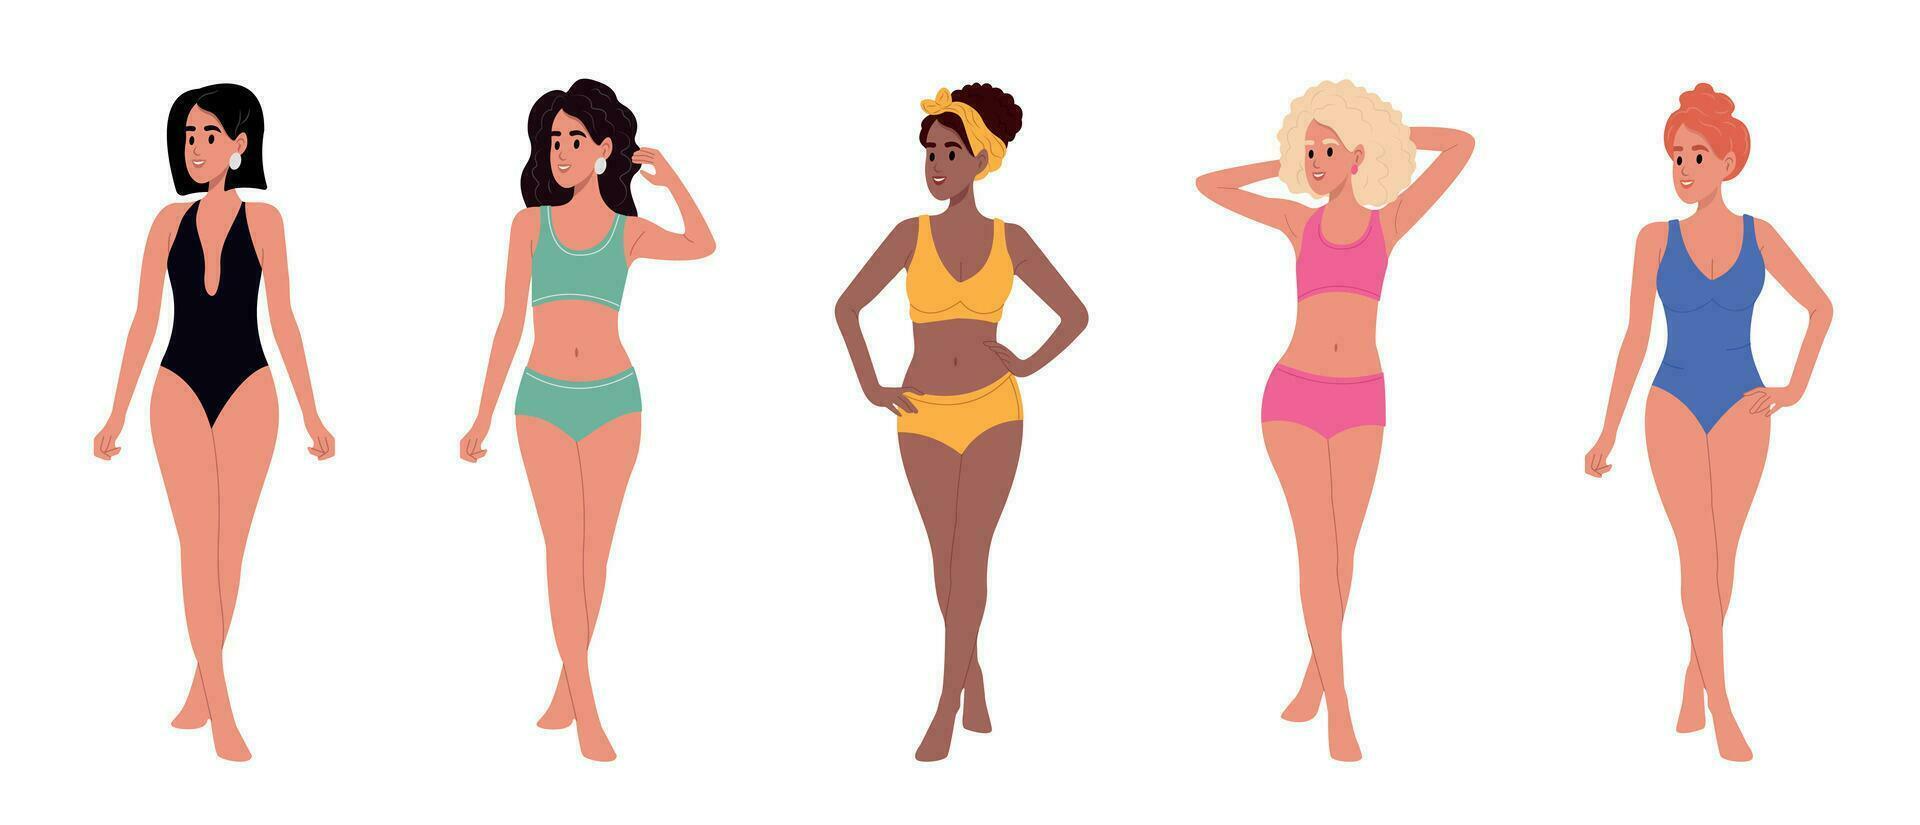 Diverse woman in underwear. Women of different beauty, hair, skin color. Women in swimsuits, group portrait. Young beautiful multiethnic women of different nationalities. Diversity, multi-ethnic vector